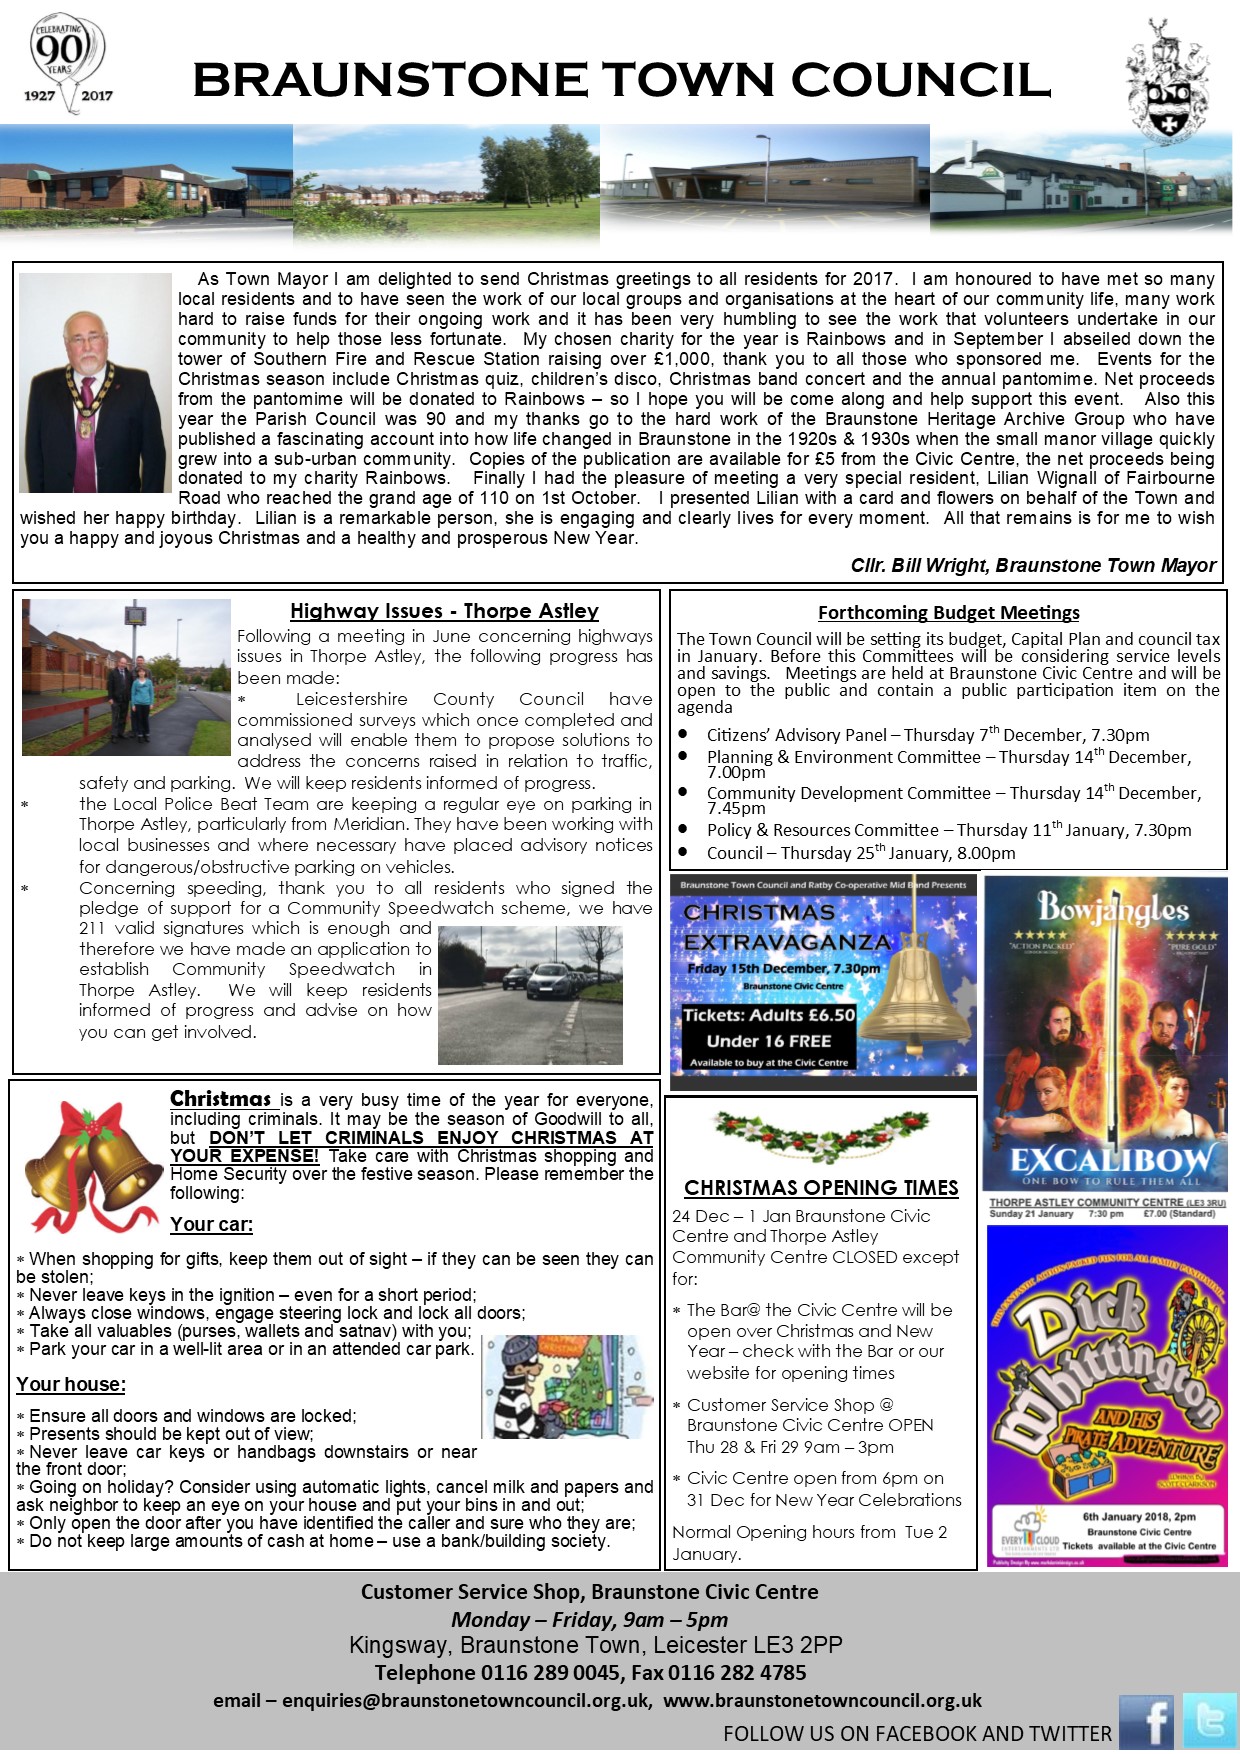 The Town Council article from the December 2017 issue of the Braunstone Life